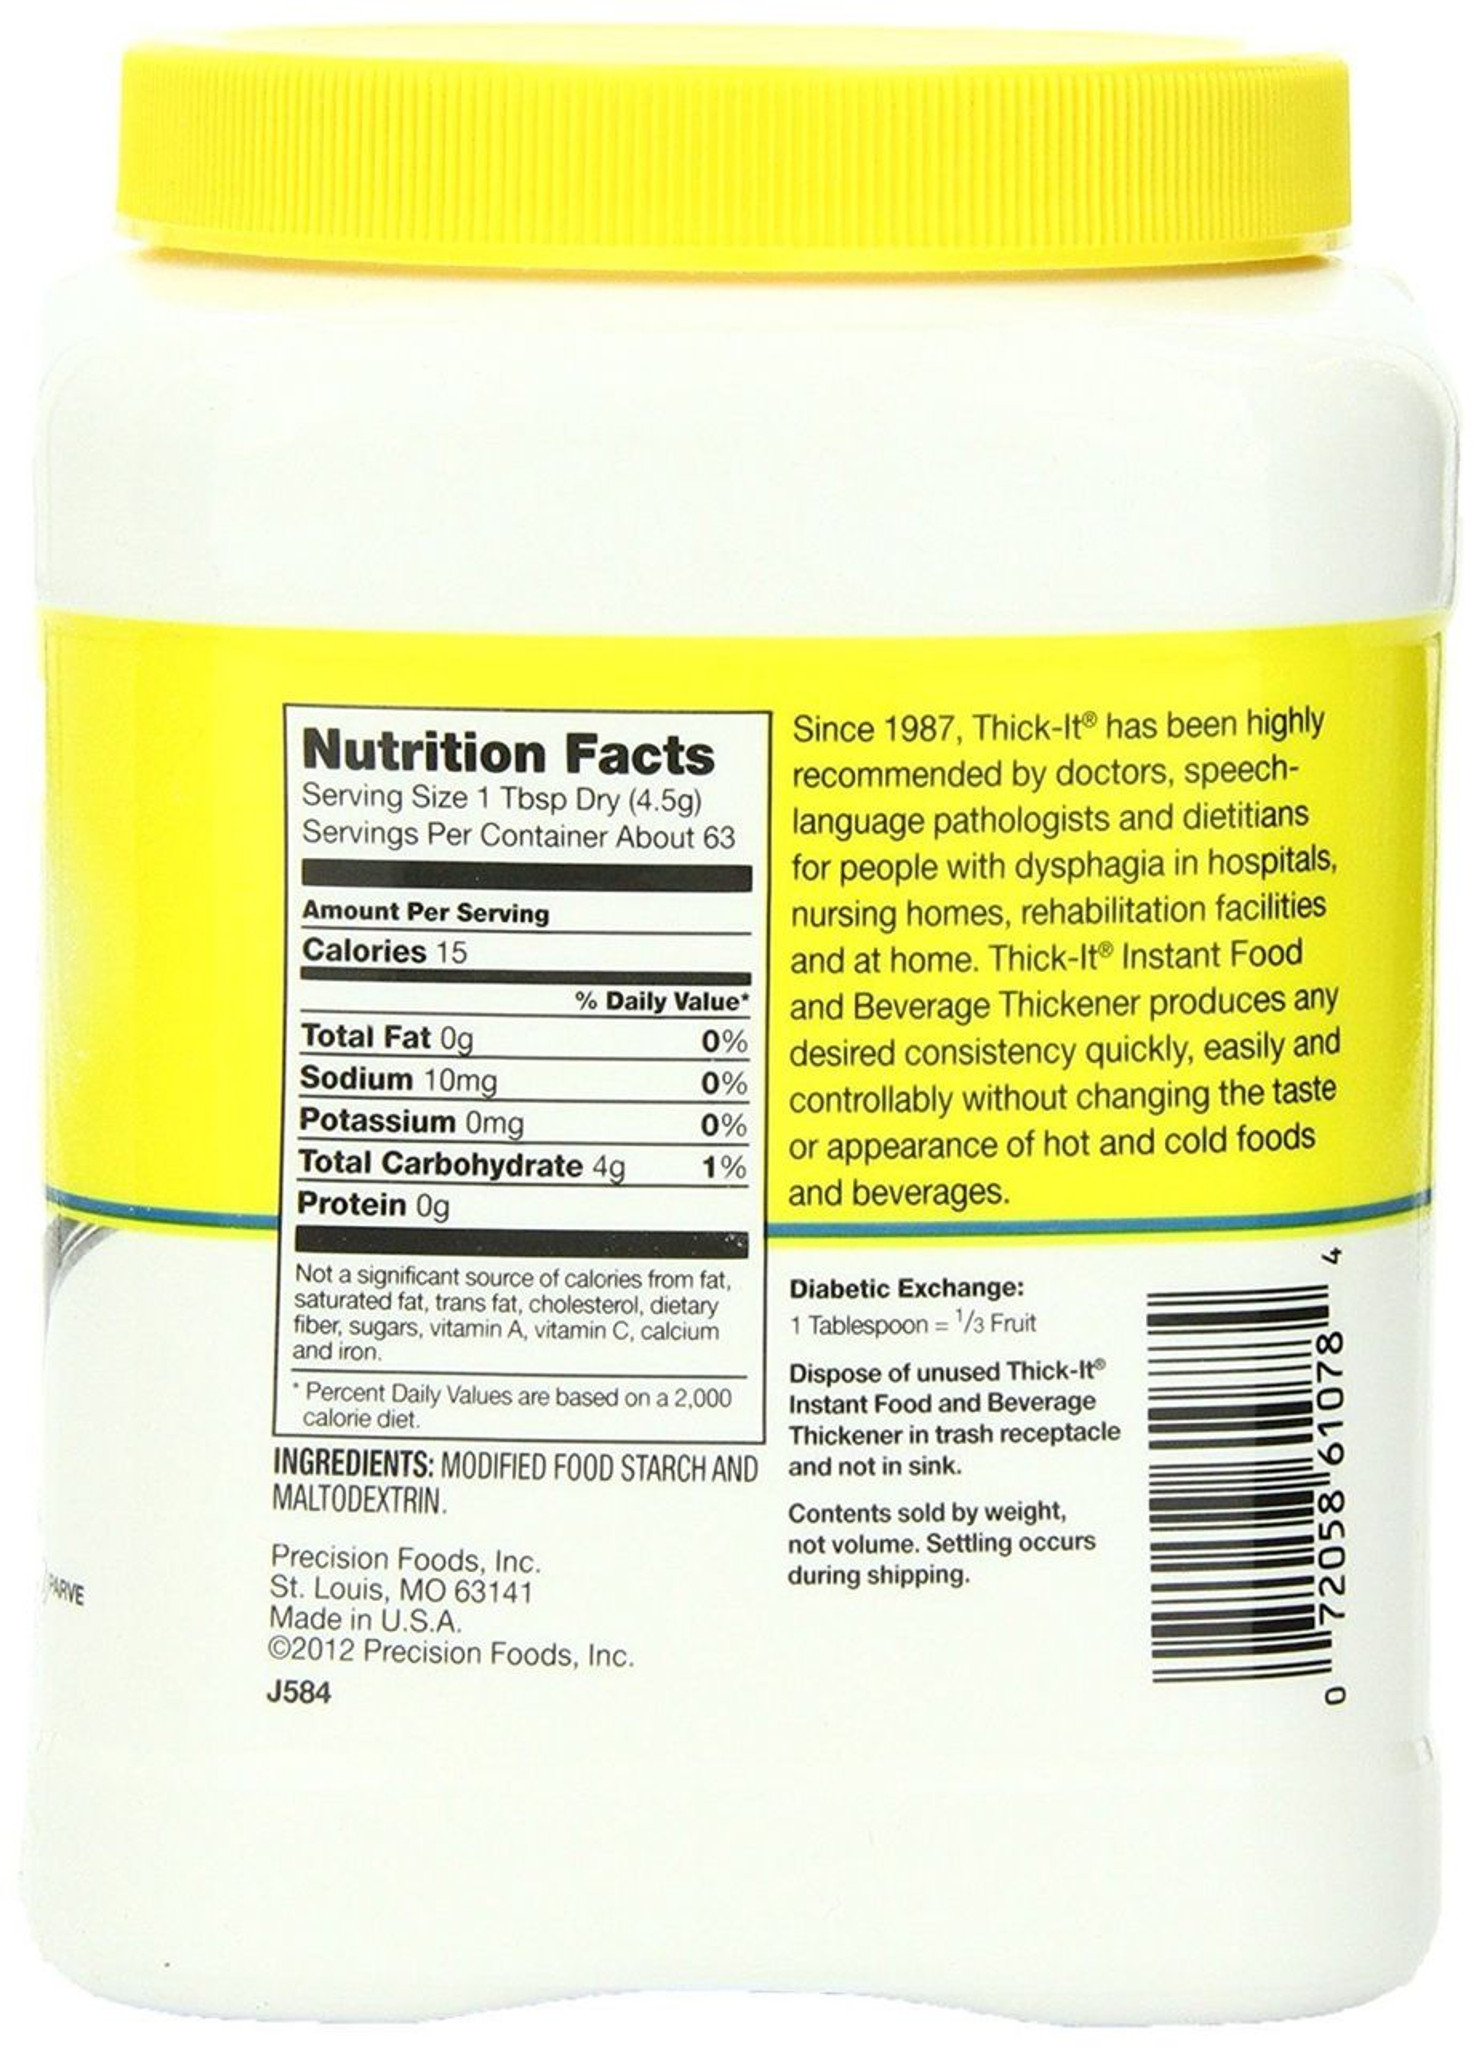 Thick-It 2 Concentrated Instant Food and Beverage Thickener